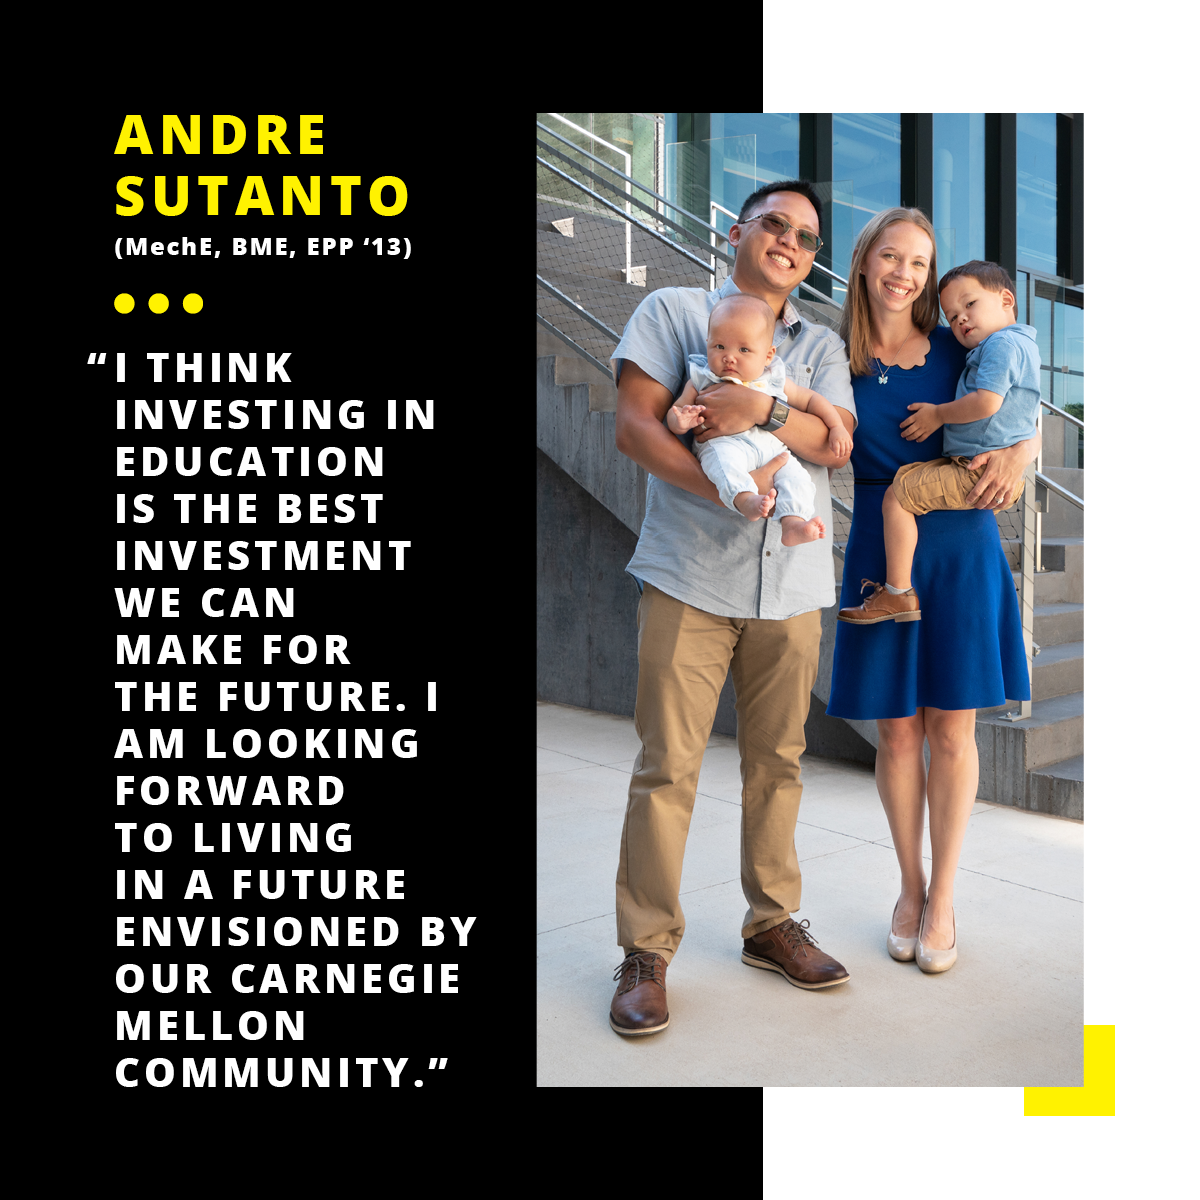 Andre Sutanto with his family with quote: "I think investing in education is the best investment we can make for the future. I am looking forward to living in a future envisioned by our Carnegie Mellon Community."